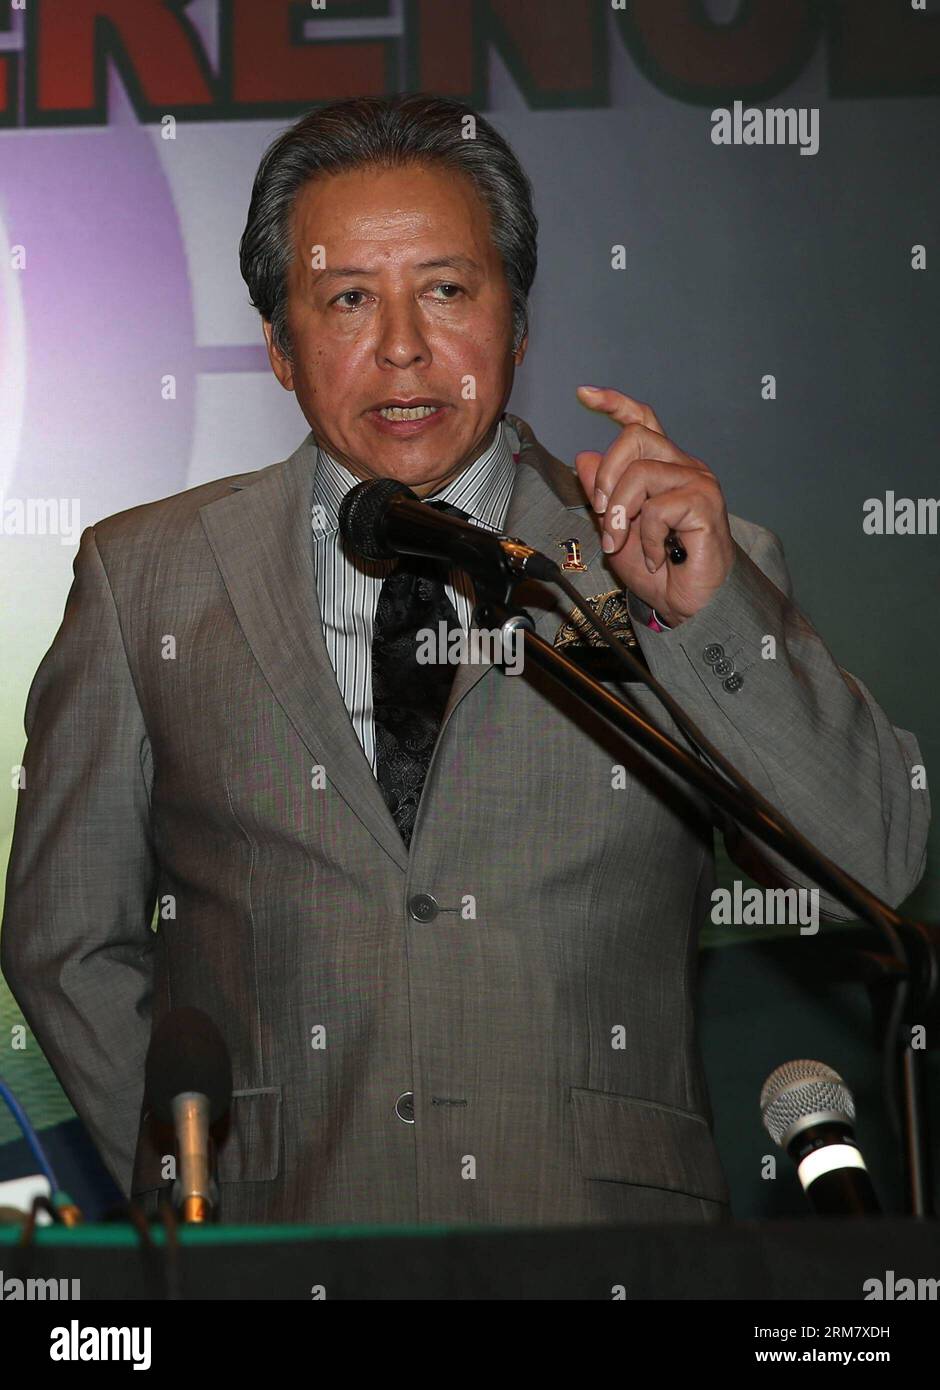 (140318) -- KUALA LUMPUR, March 18, 2014 (Xinhua) -- Malaysian Foreign Minister Anifah Aman speaks at a news conference in Kuala Lumpur, Malaysia, March 18, 2014. Aman said here Tuesday that his country had also sought help from almost all ASEAN leaders to reinforce air and surface assets in the current search and rescue operations for the missing MH370 flight. (Xinhua/Wang Shen) MALAYSIA-KUALA LUMPUR-MISSING FLIGHT-FM-ASEAN-HELP PUBLICATIONxNOTxINxCHN   Kuala Lumpur March 18 2014 XINHUA Malaysian Foreign Ministers Anifah AMAN Speaks AT a News Conference in Kuala Lumpur Malaysia March 18 2014 Stock Photo